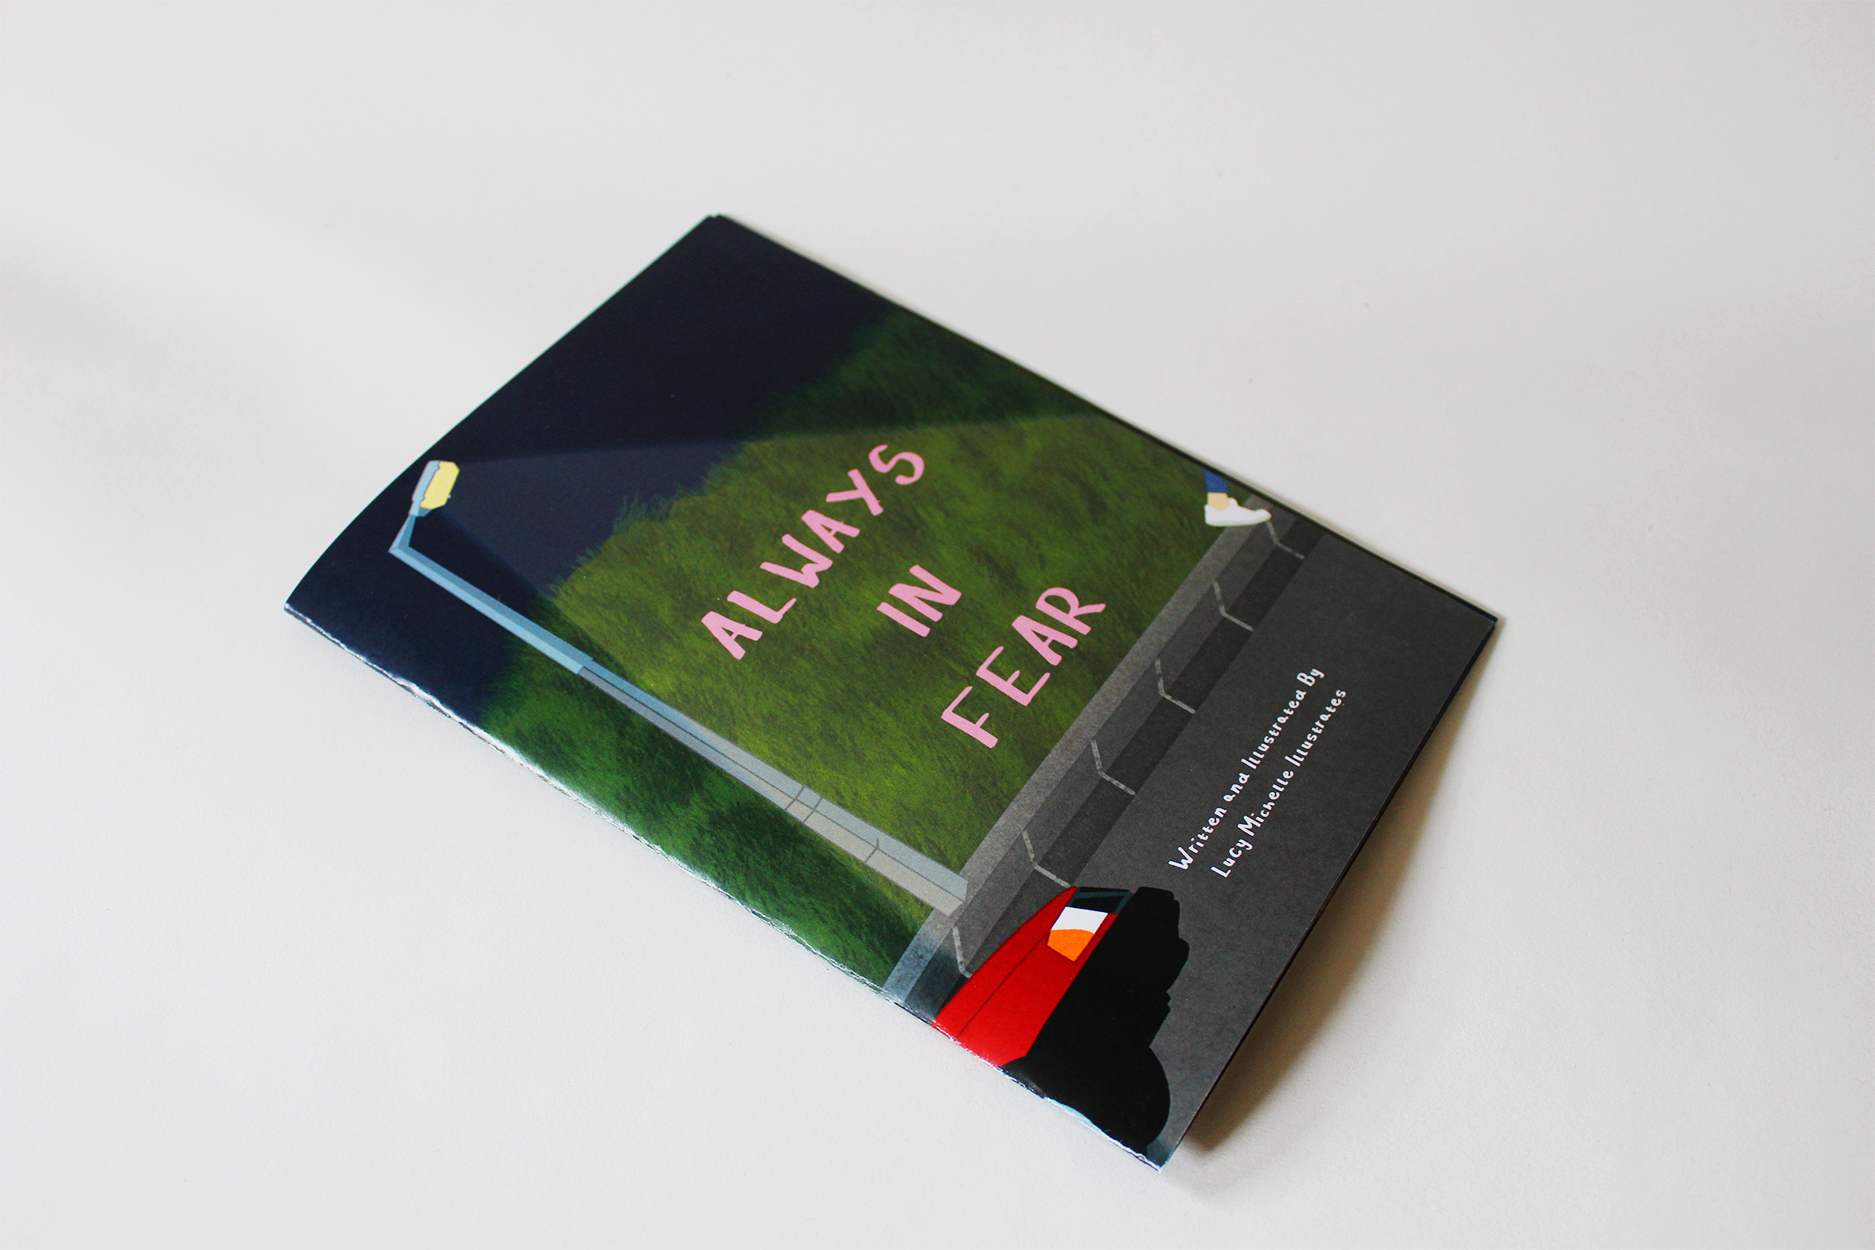 A photograph of printed zine 'Always in Fear' by Lucy Taylor. The front cover shows a road and pathway, lined by green hedges. Creeping on to the side of the zine is a red car, with headlights on. A lamppost shines a light downward, revealing the title of the zine. A small foot can be seen leaving the other side of the page, as if walking out of the frame